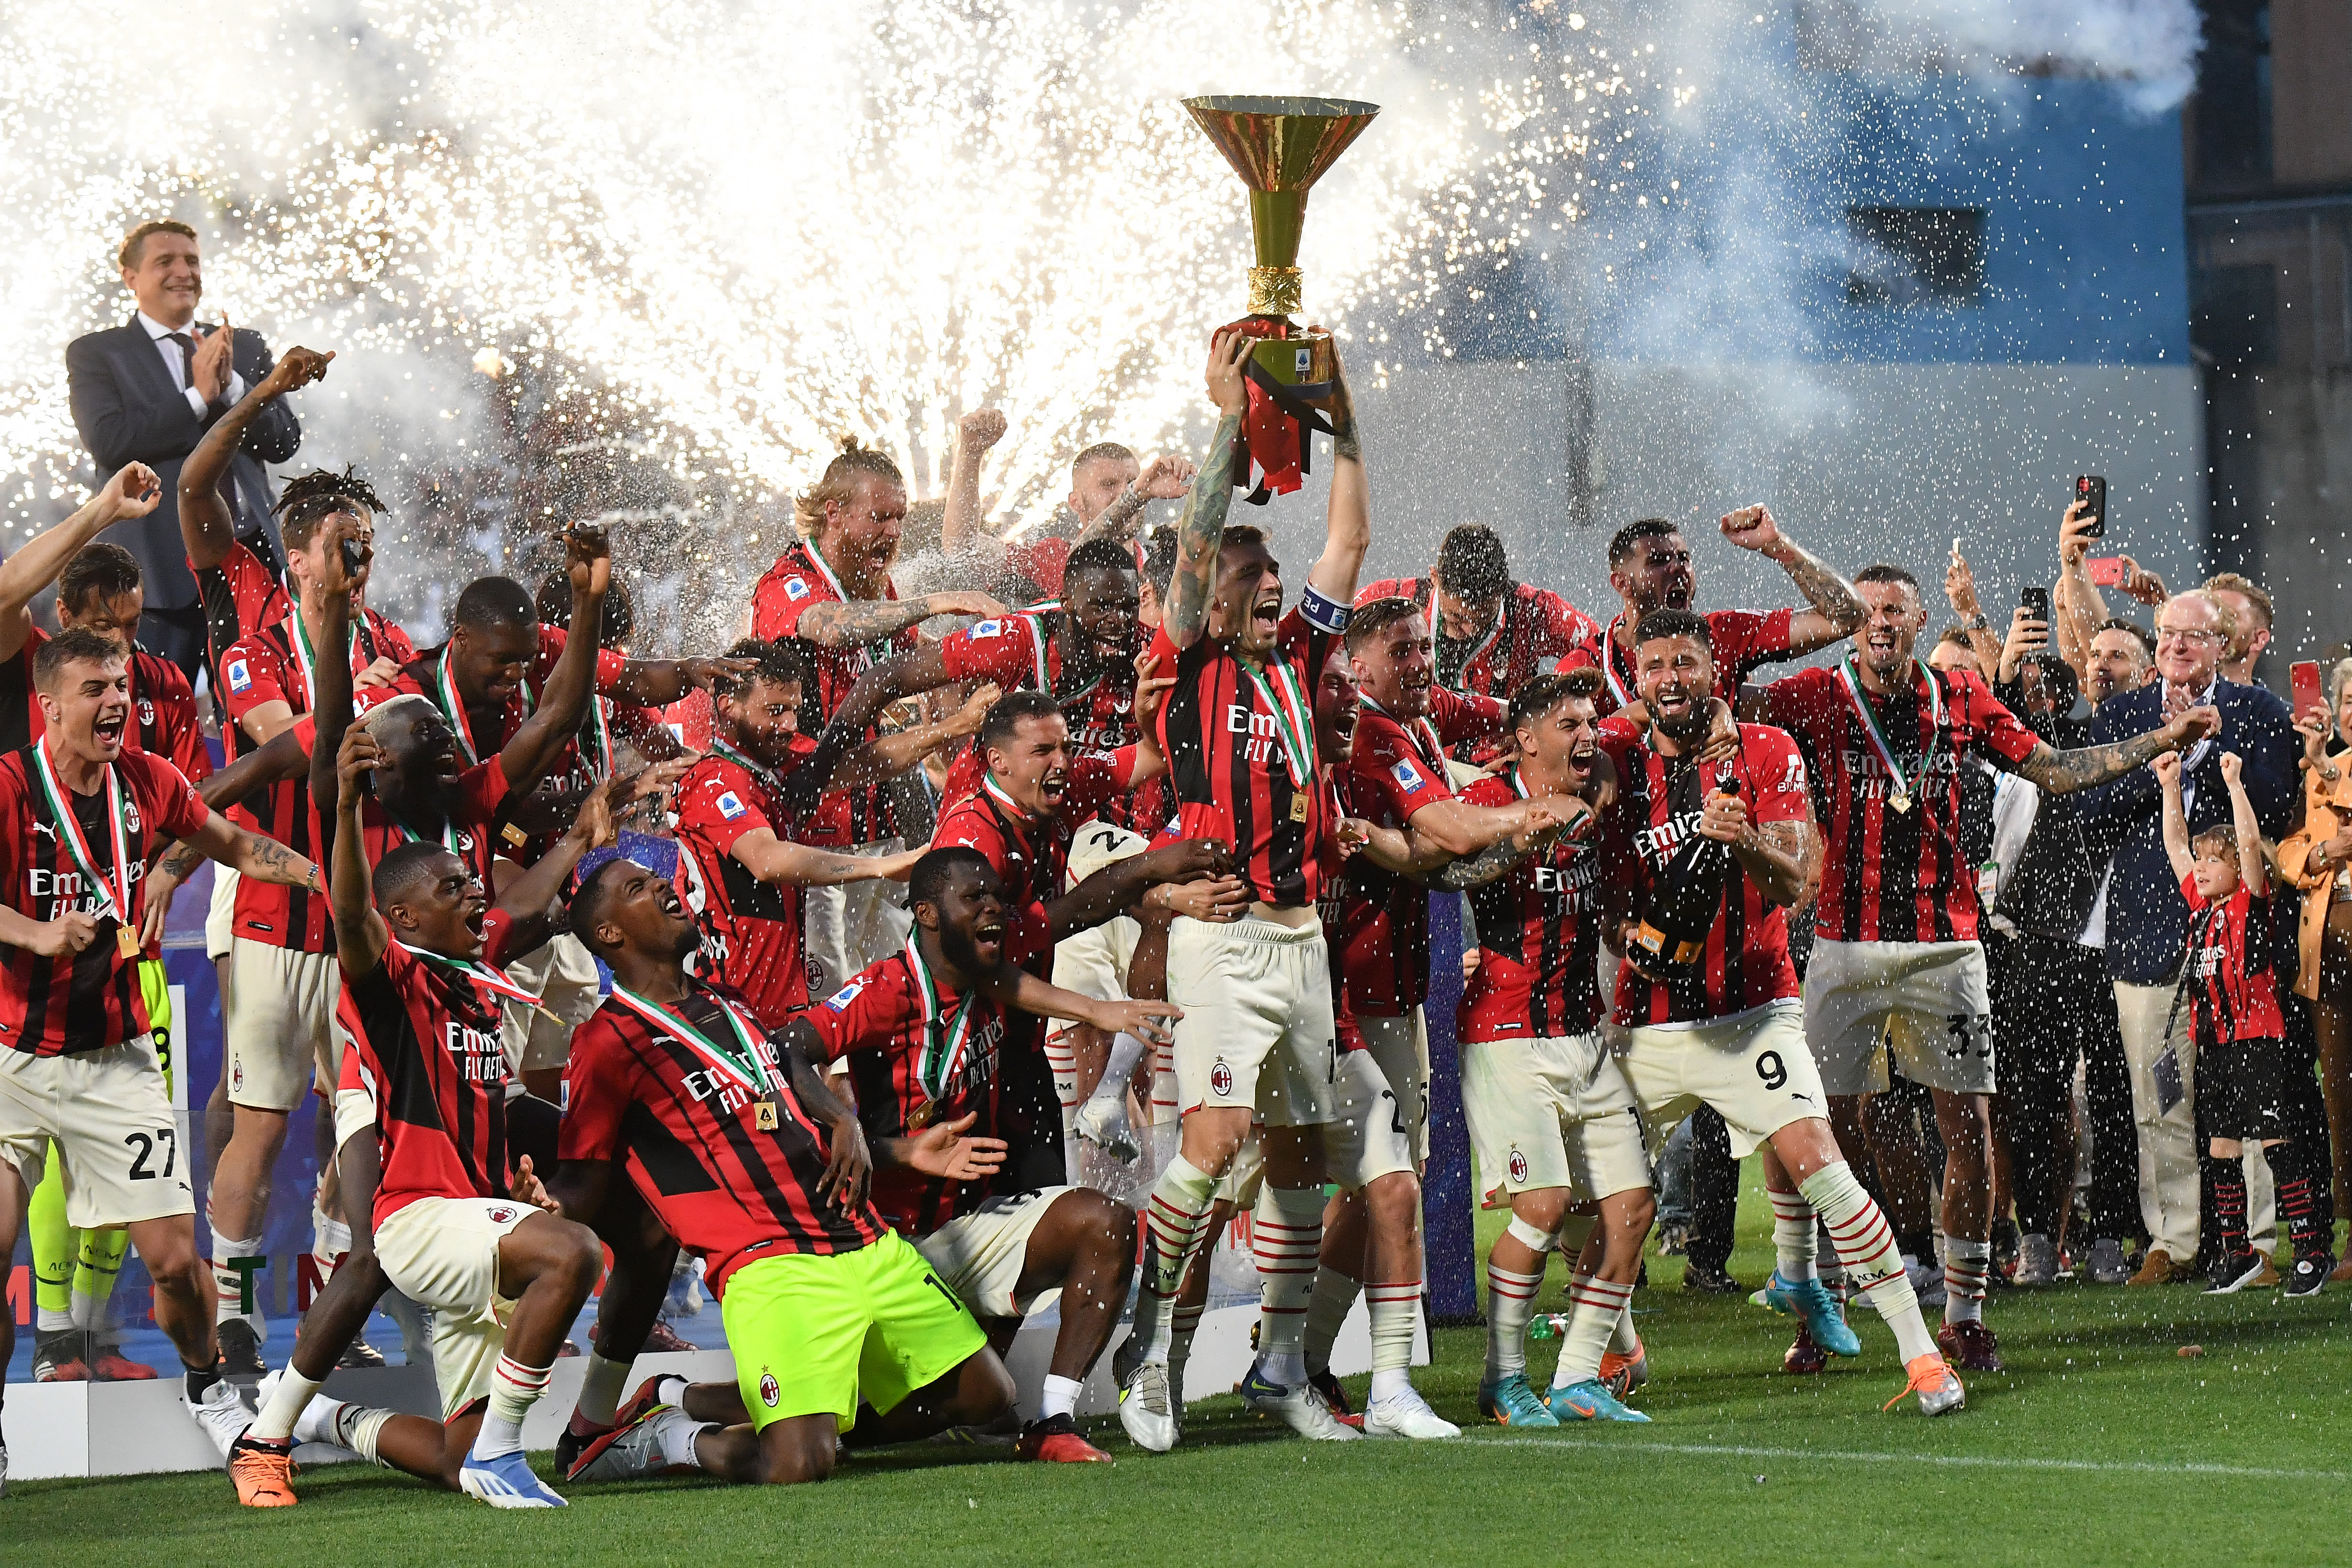 AC Milan’s Serie A title shows that money and superstars don’t always help a team win